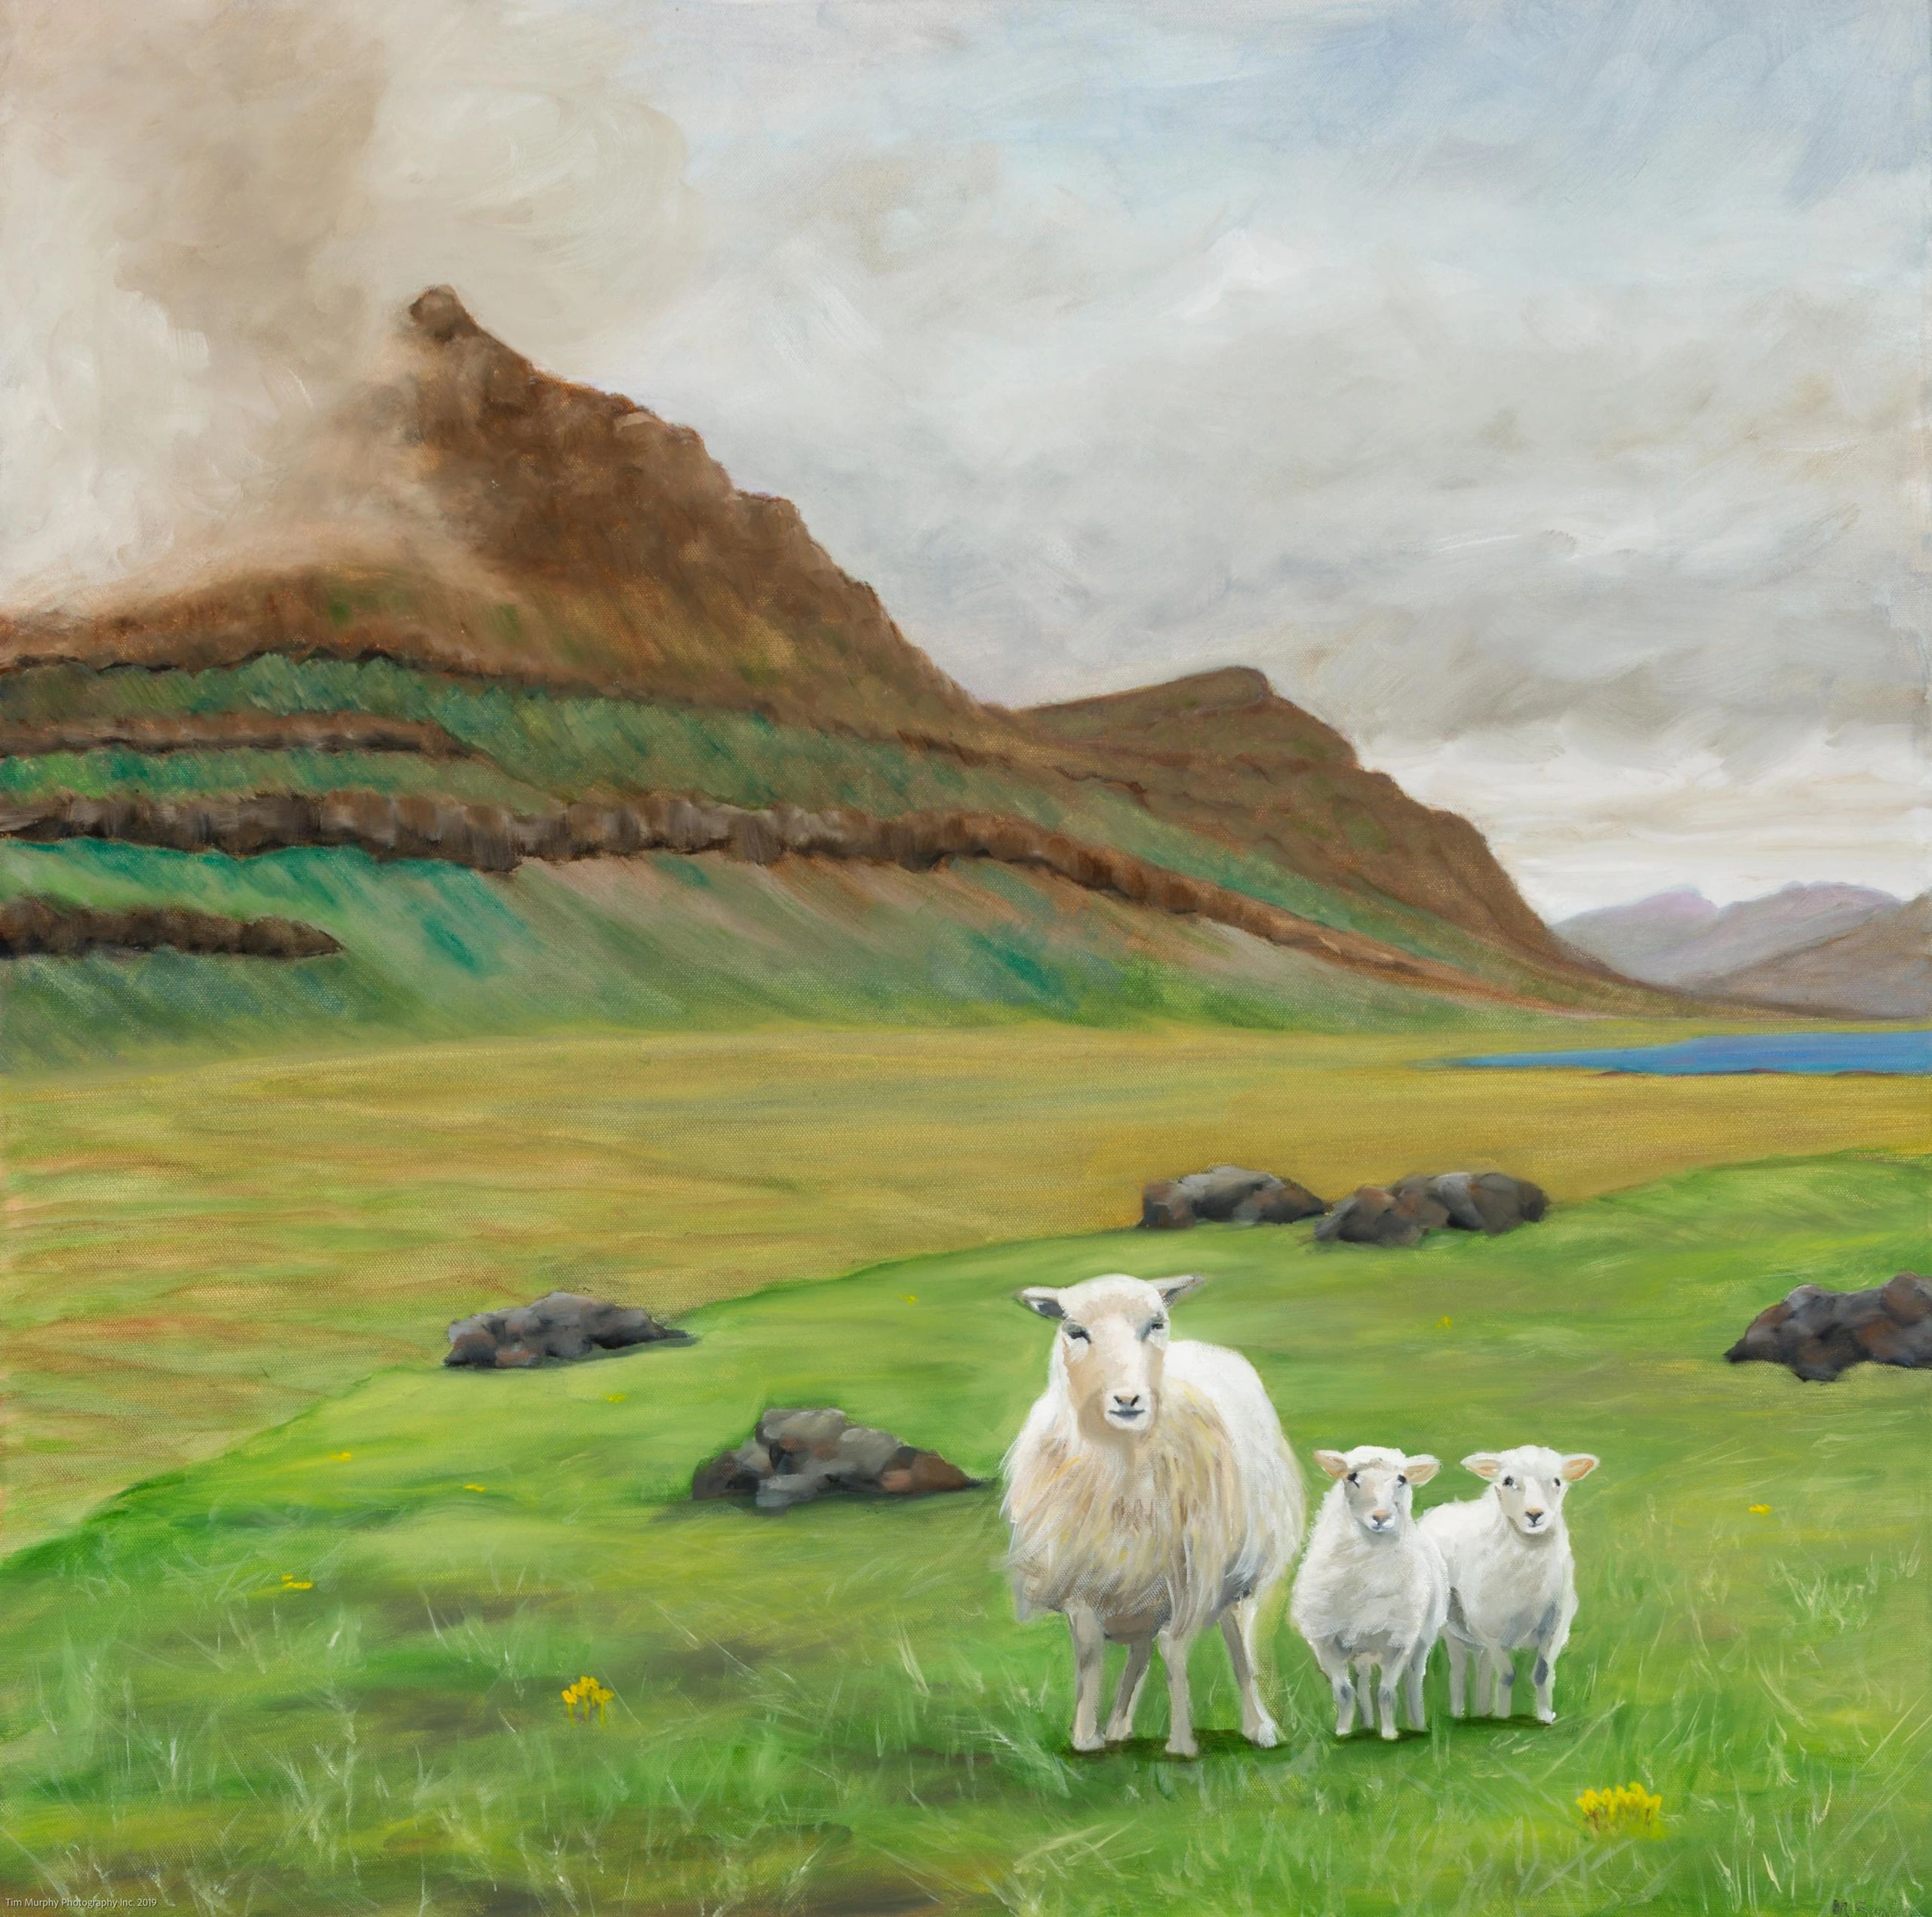 3 sheep in front of a mountain in Iceland